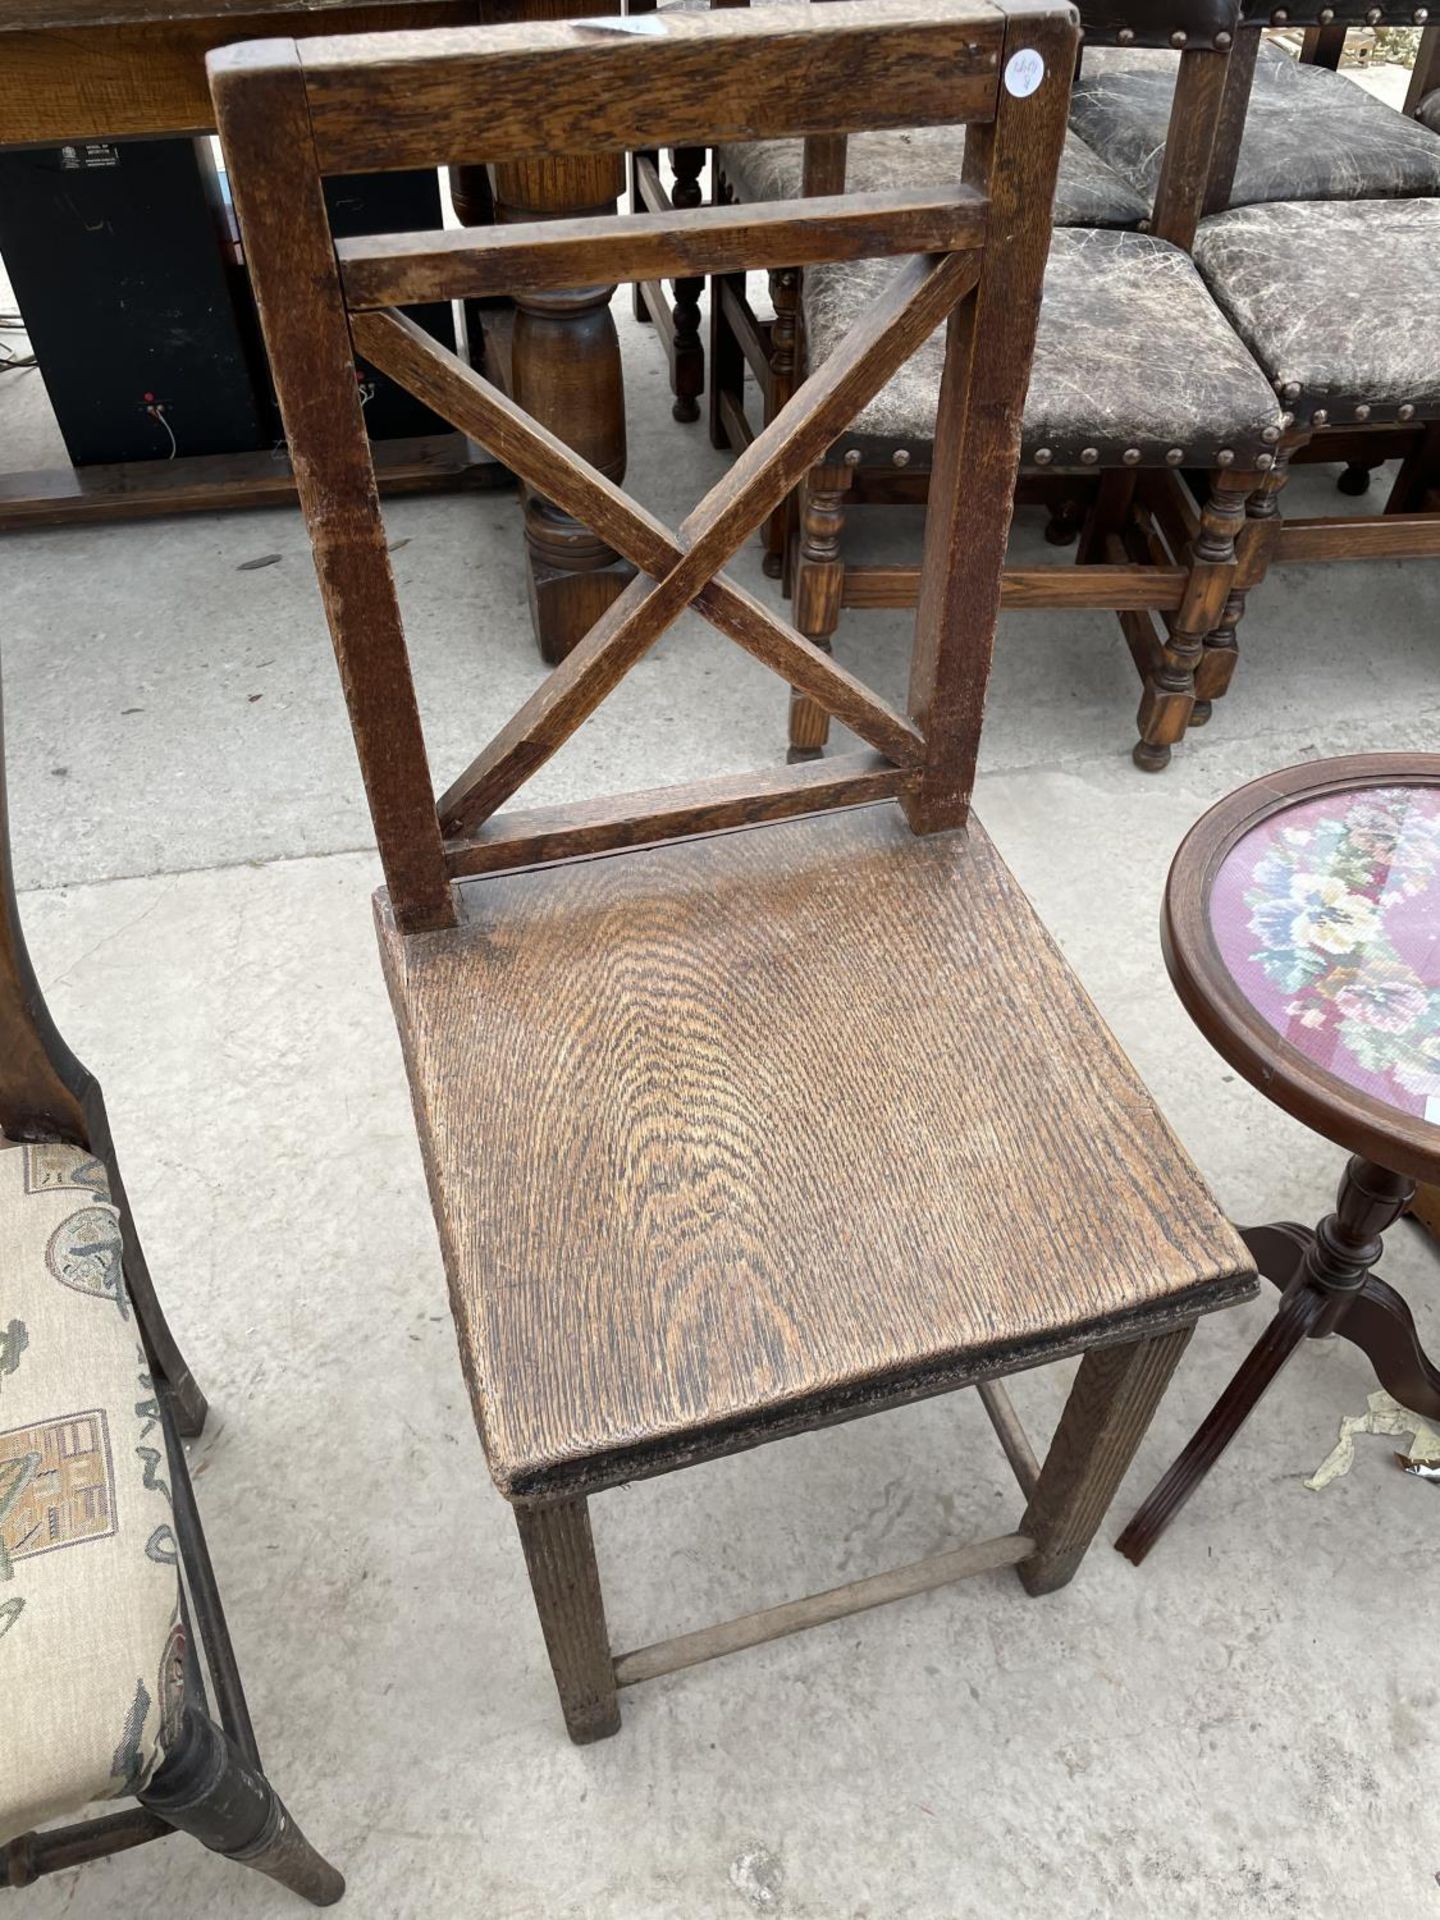 A VICTORIAN OAK KITCHEN CHAIR WITH SOLID SEAT AND X FRAME BACK